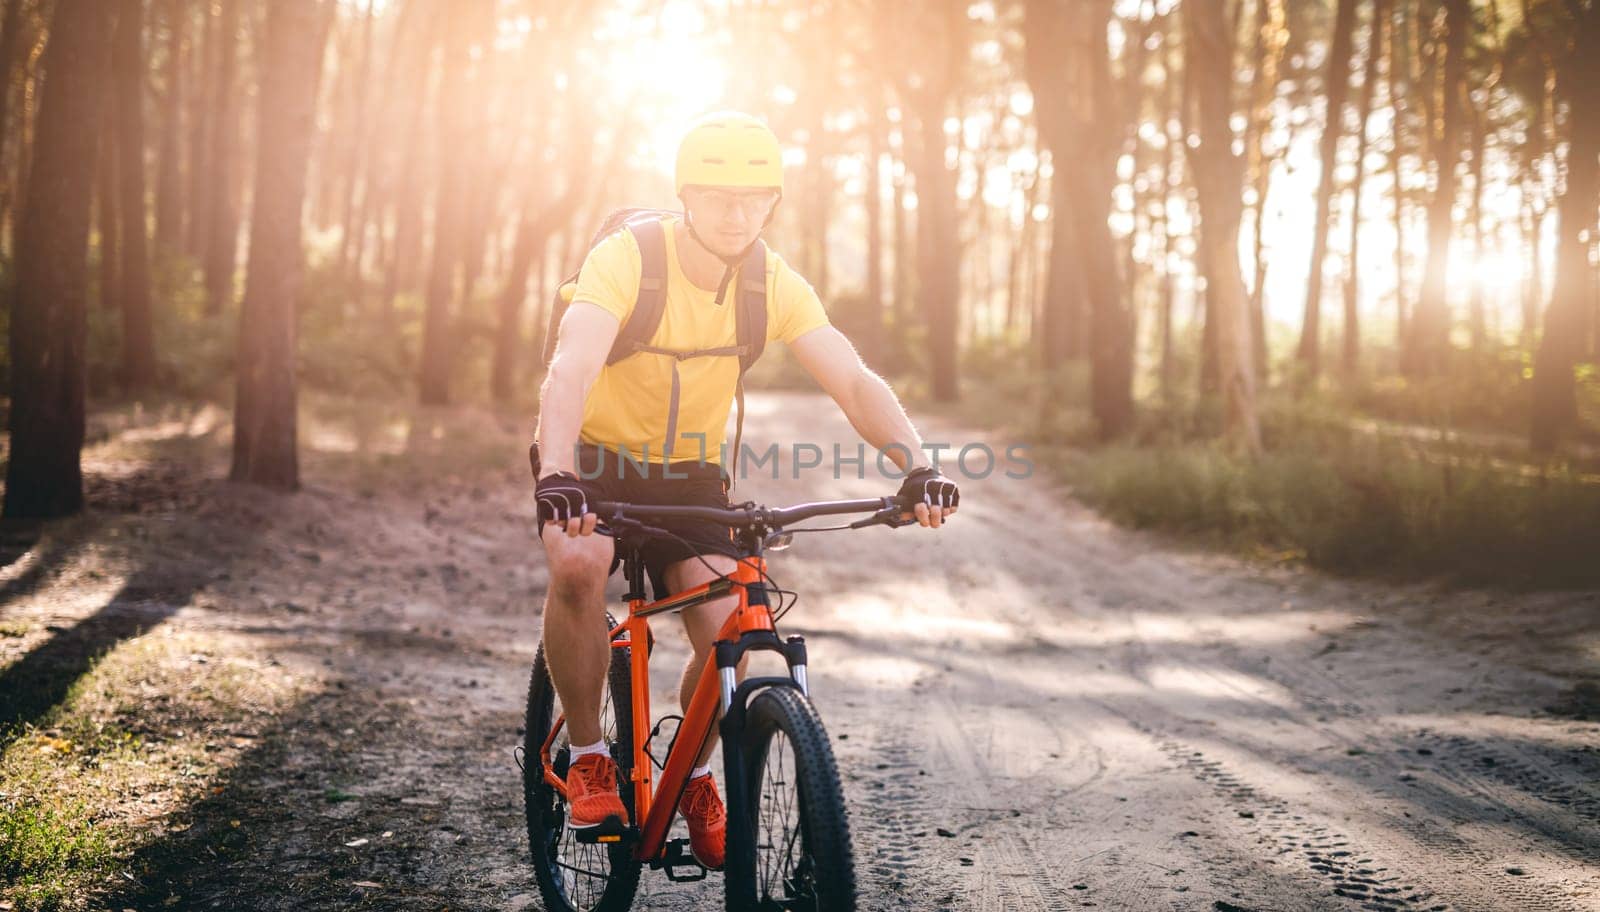 Cyclist riding bicycle along path in sunny pine forest